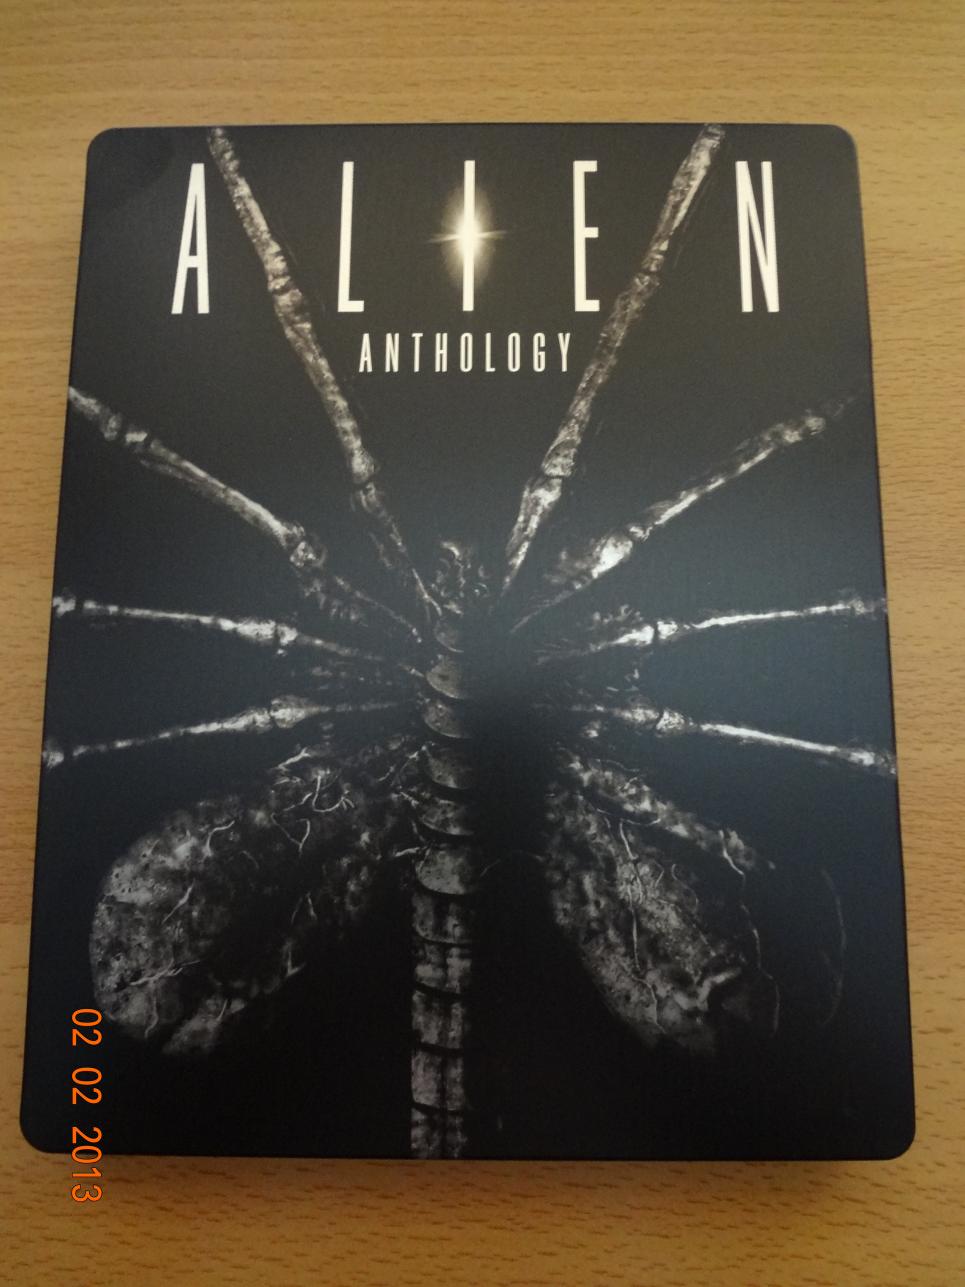 Alien Anthology Play.com Exclusive Steelbook Front